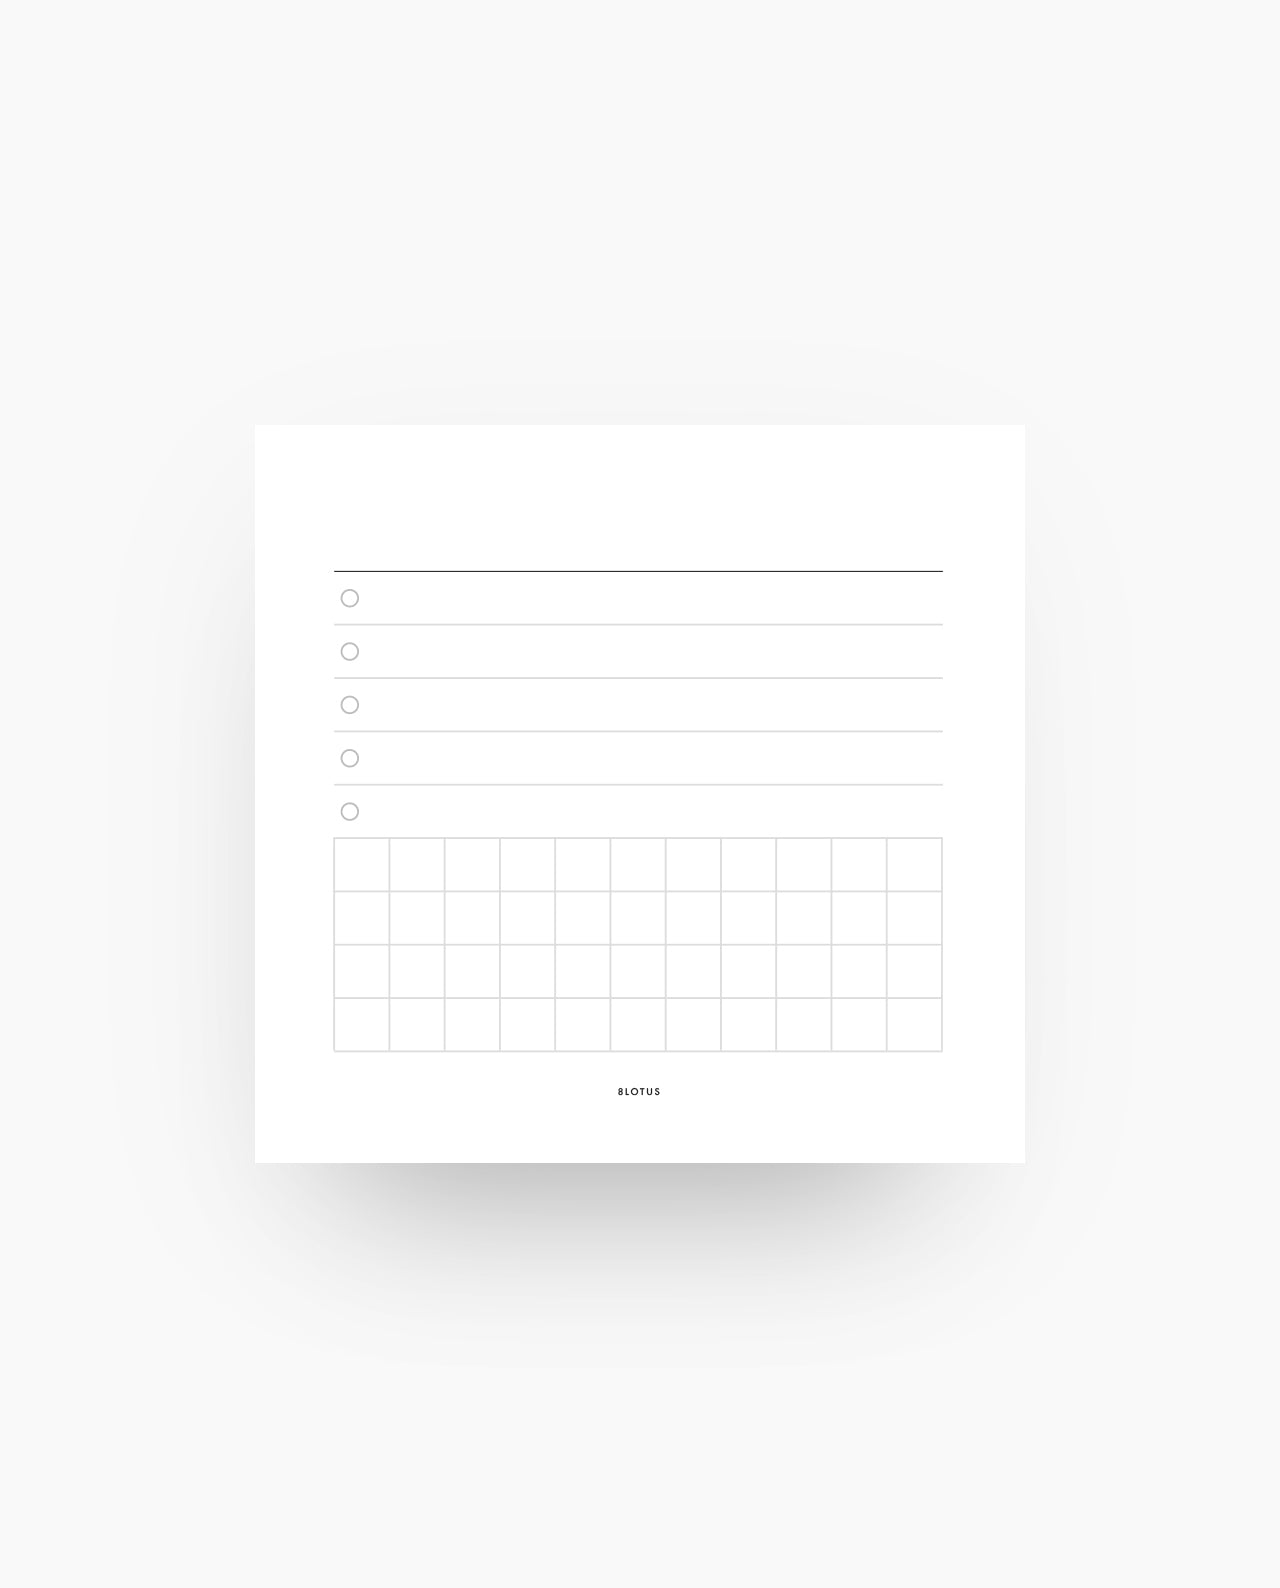 Sticky Note Printable Graph Paper